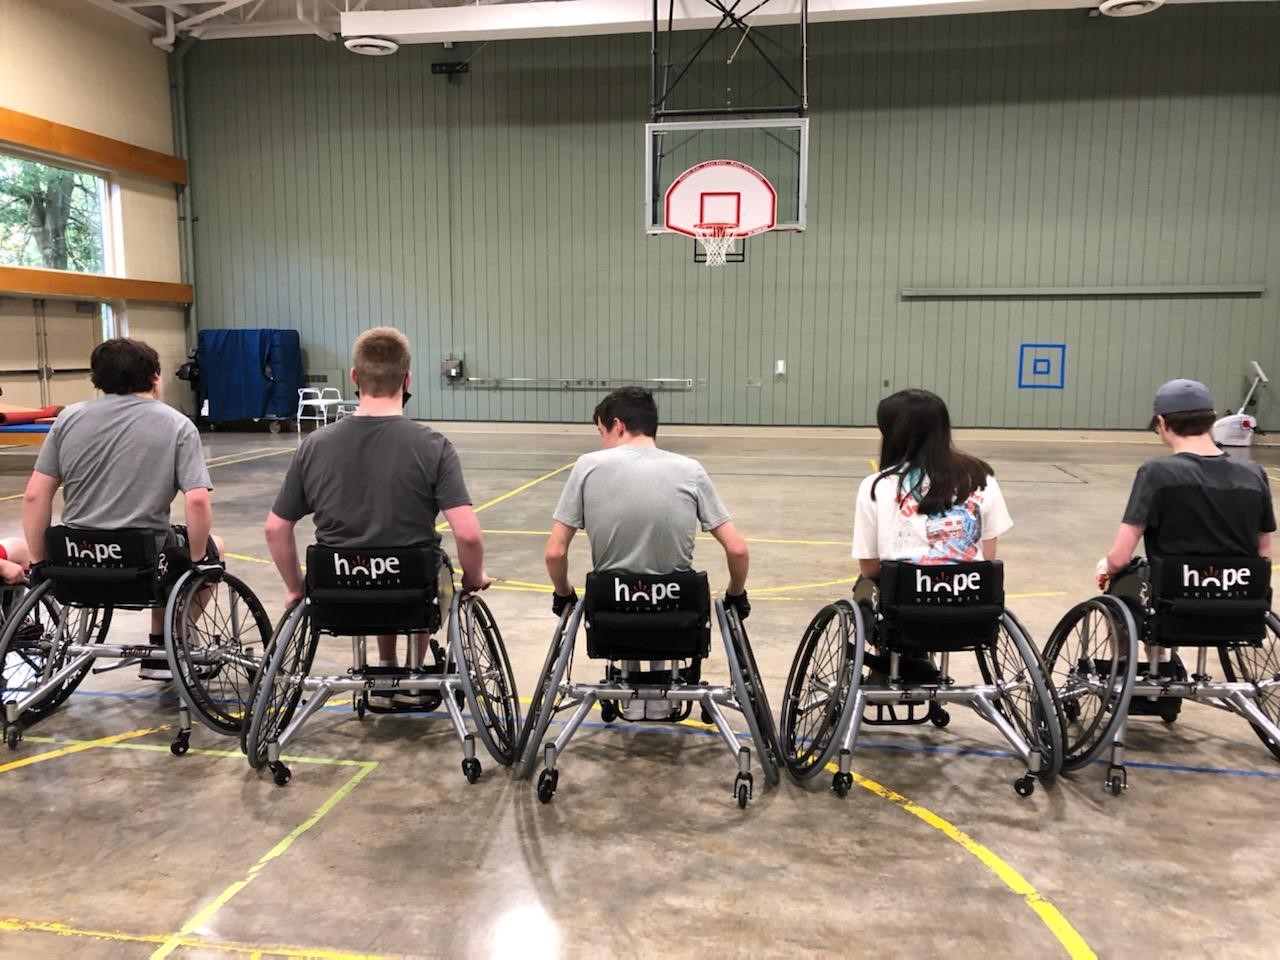 Participants sitting in basketball wheelchairs on the court